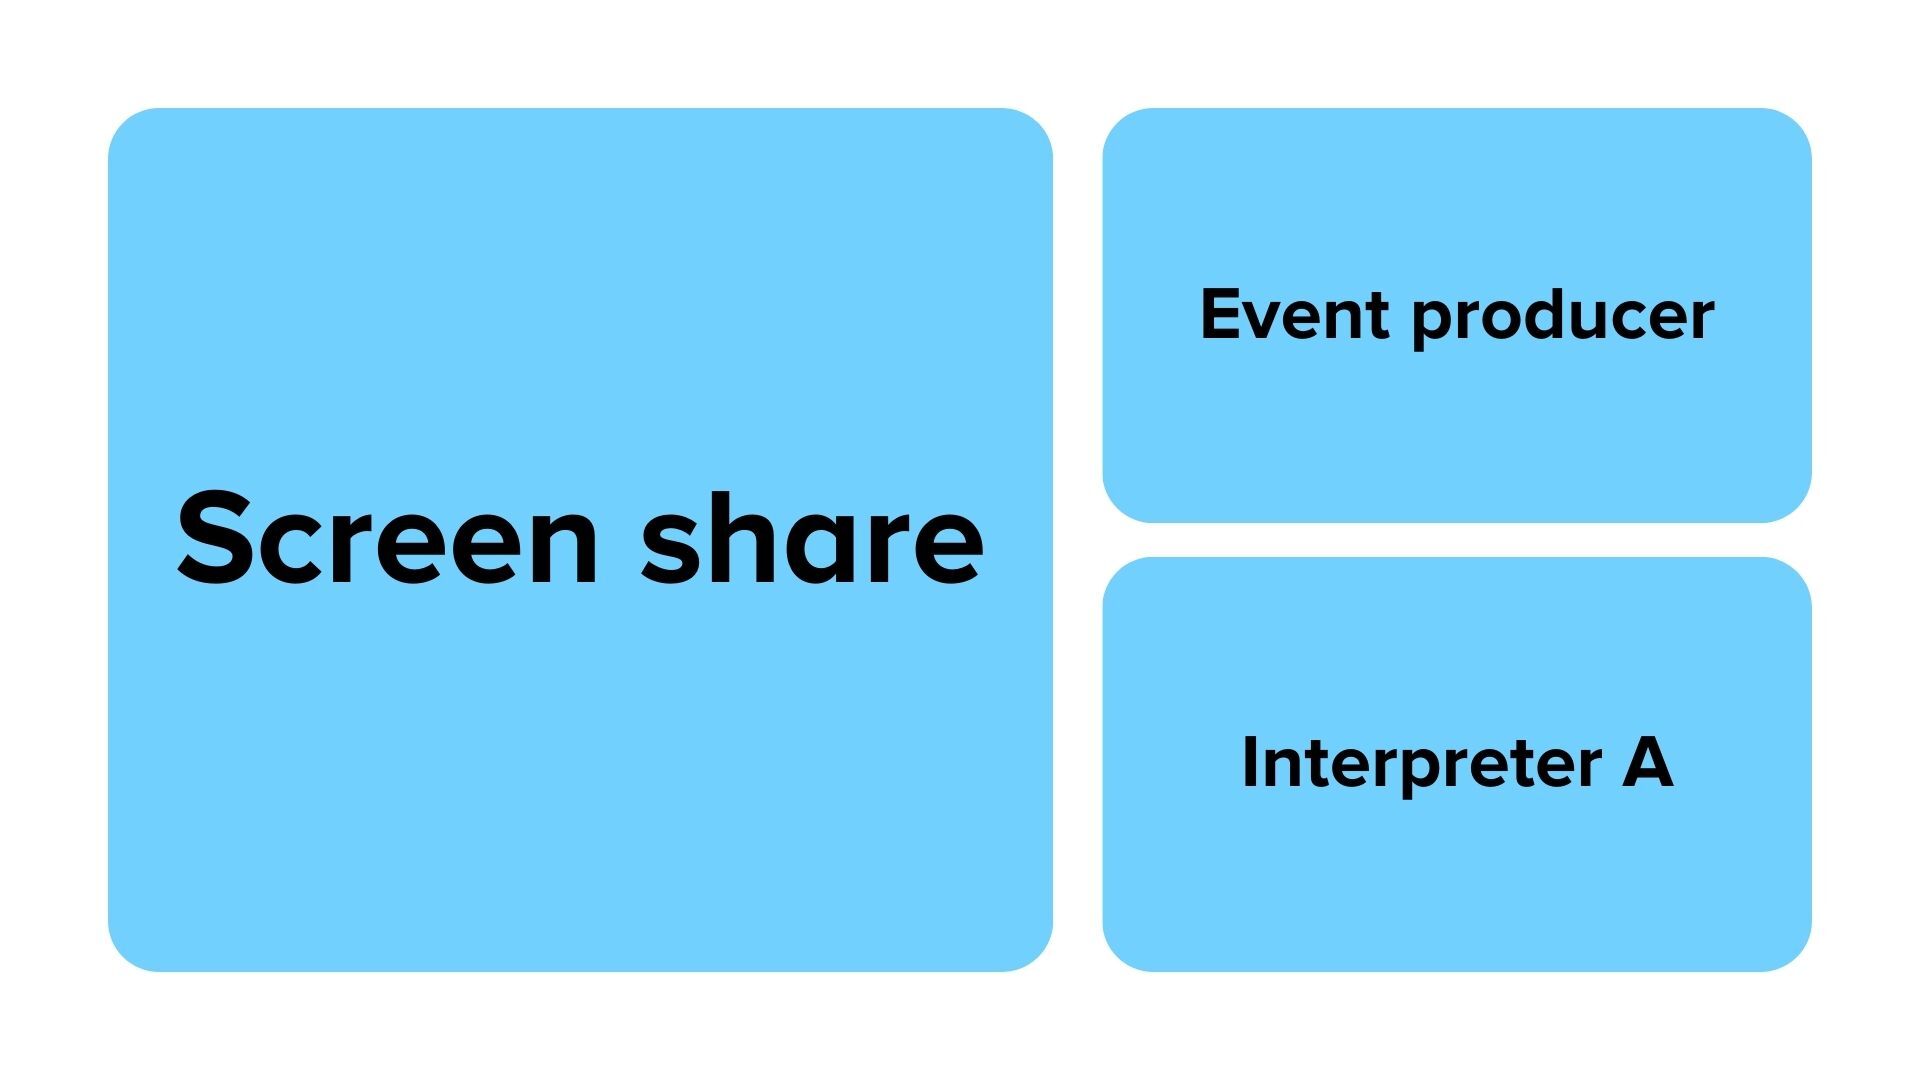 Visual layout used for planning purposes at the start of the Zoom event for deaf community members. It includes three squares with assigned roles. On the left is a larger square that is the screen share, on the top right is a smaller square for the event producer, and on the bottom right is a smaller square for Interpreter A.